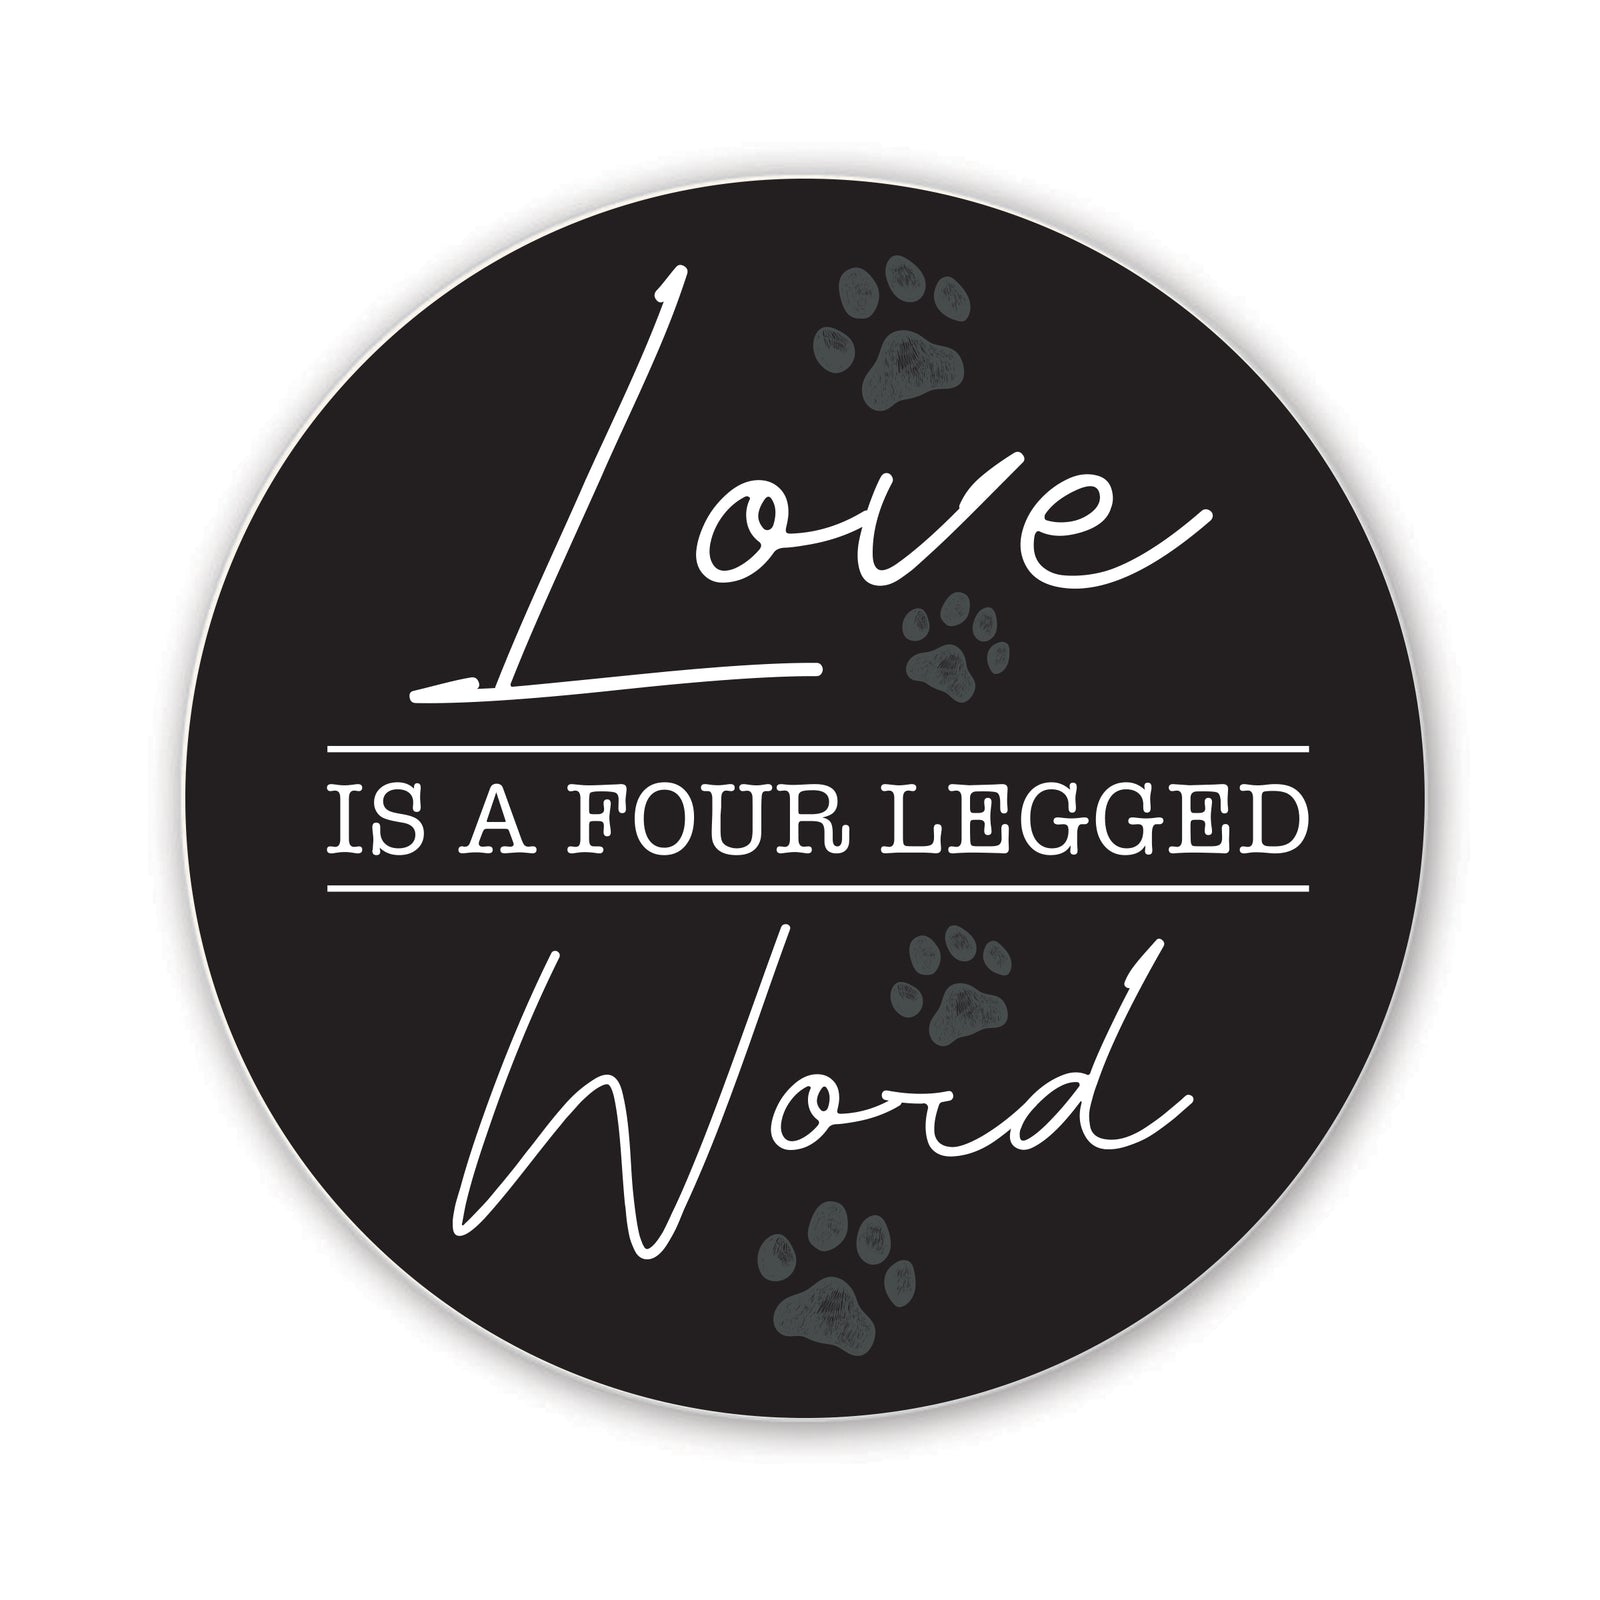 Refrigerator Magnet Perfect Gift Idea For Pet Owners - Love Is Four Legged